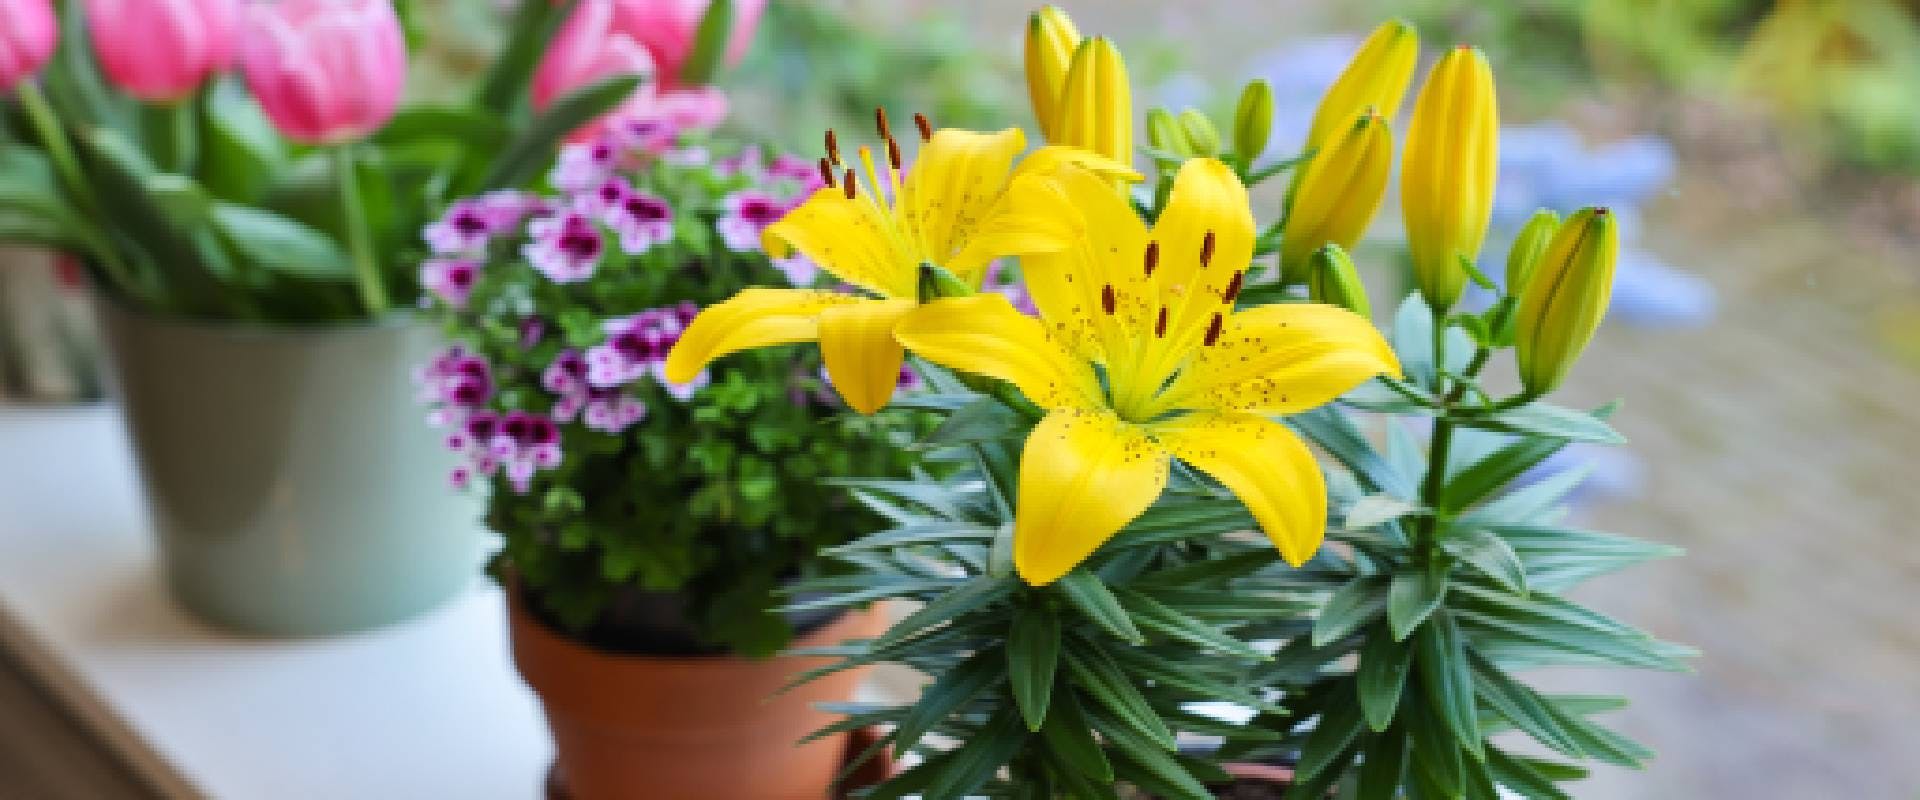 Yellow lilies in a pot next to other potted flowers